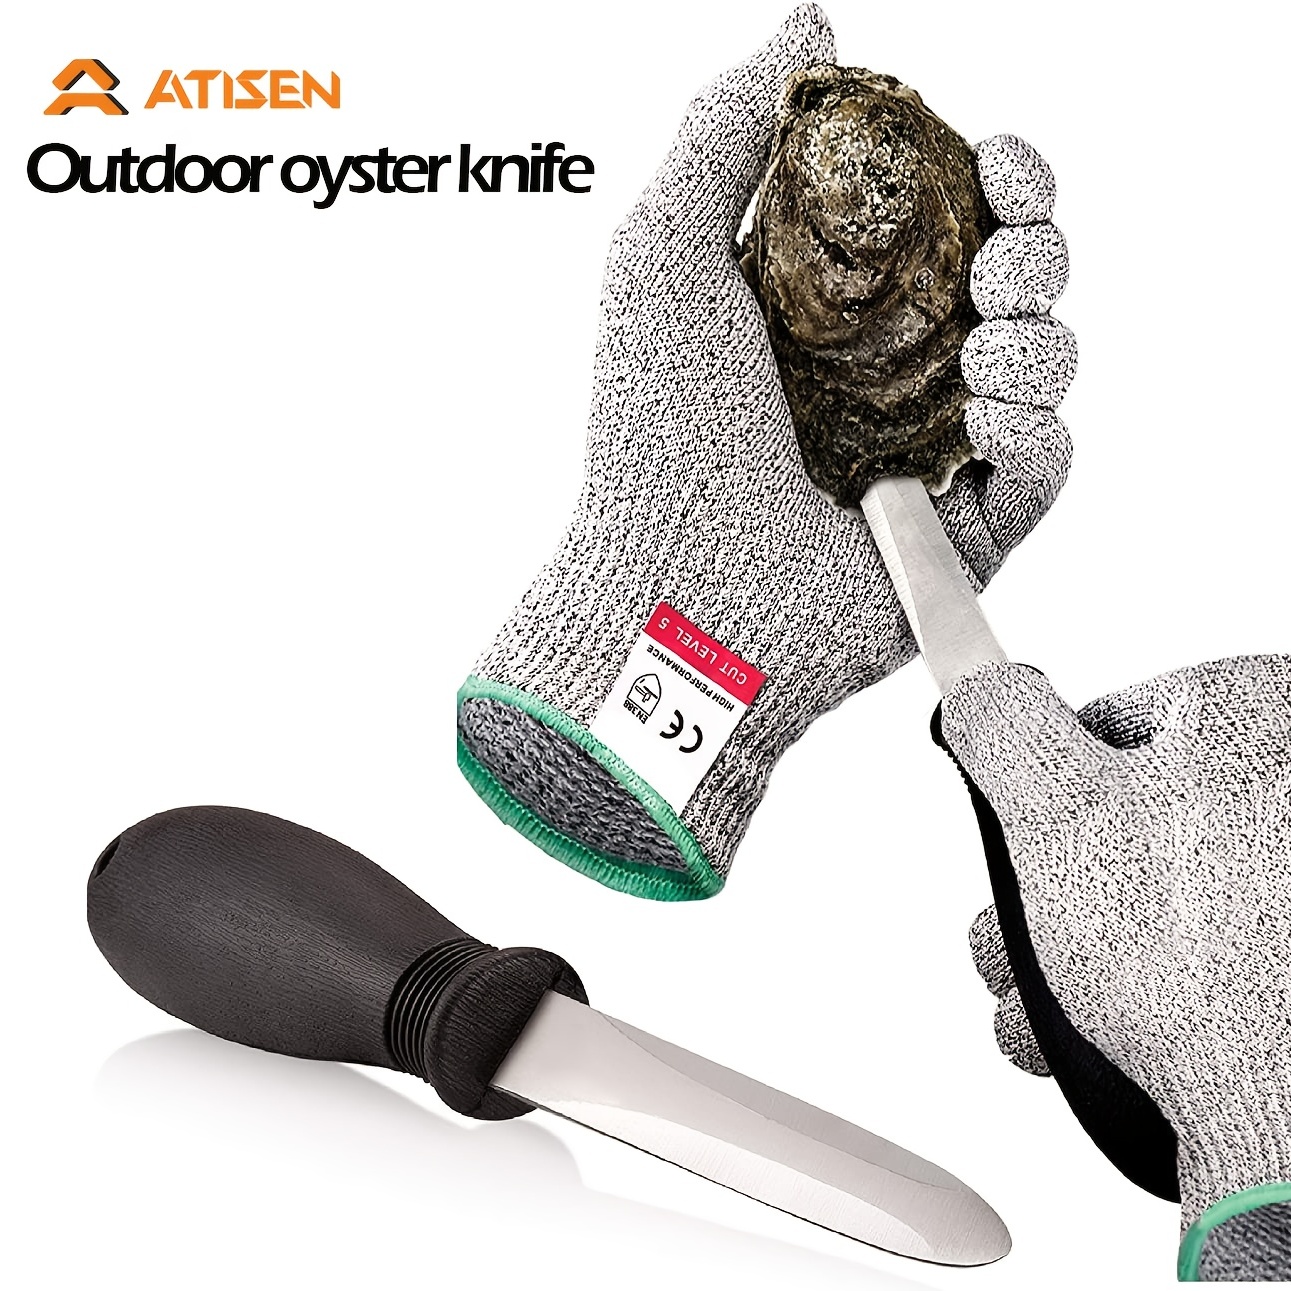 Ouvre Huitres Facile Ouvre Huitres Bois Pince À Huîtres Outils Pour Fruits  De Mer Oyster Shucking Clamp Oyster Shucker Oyster Shell Tool